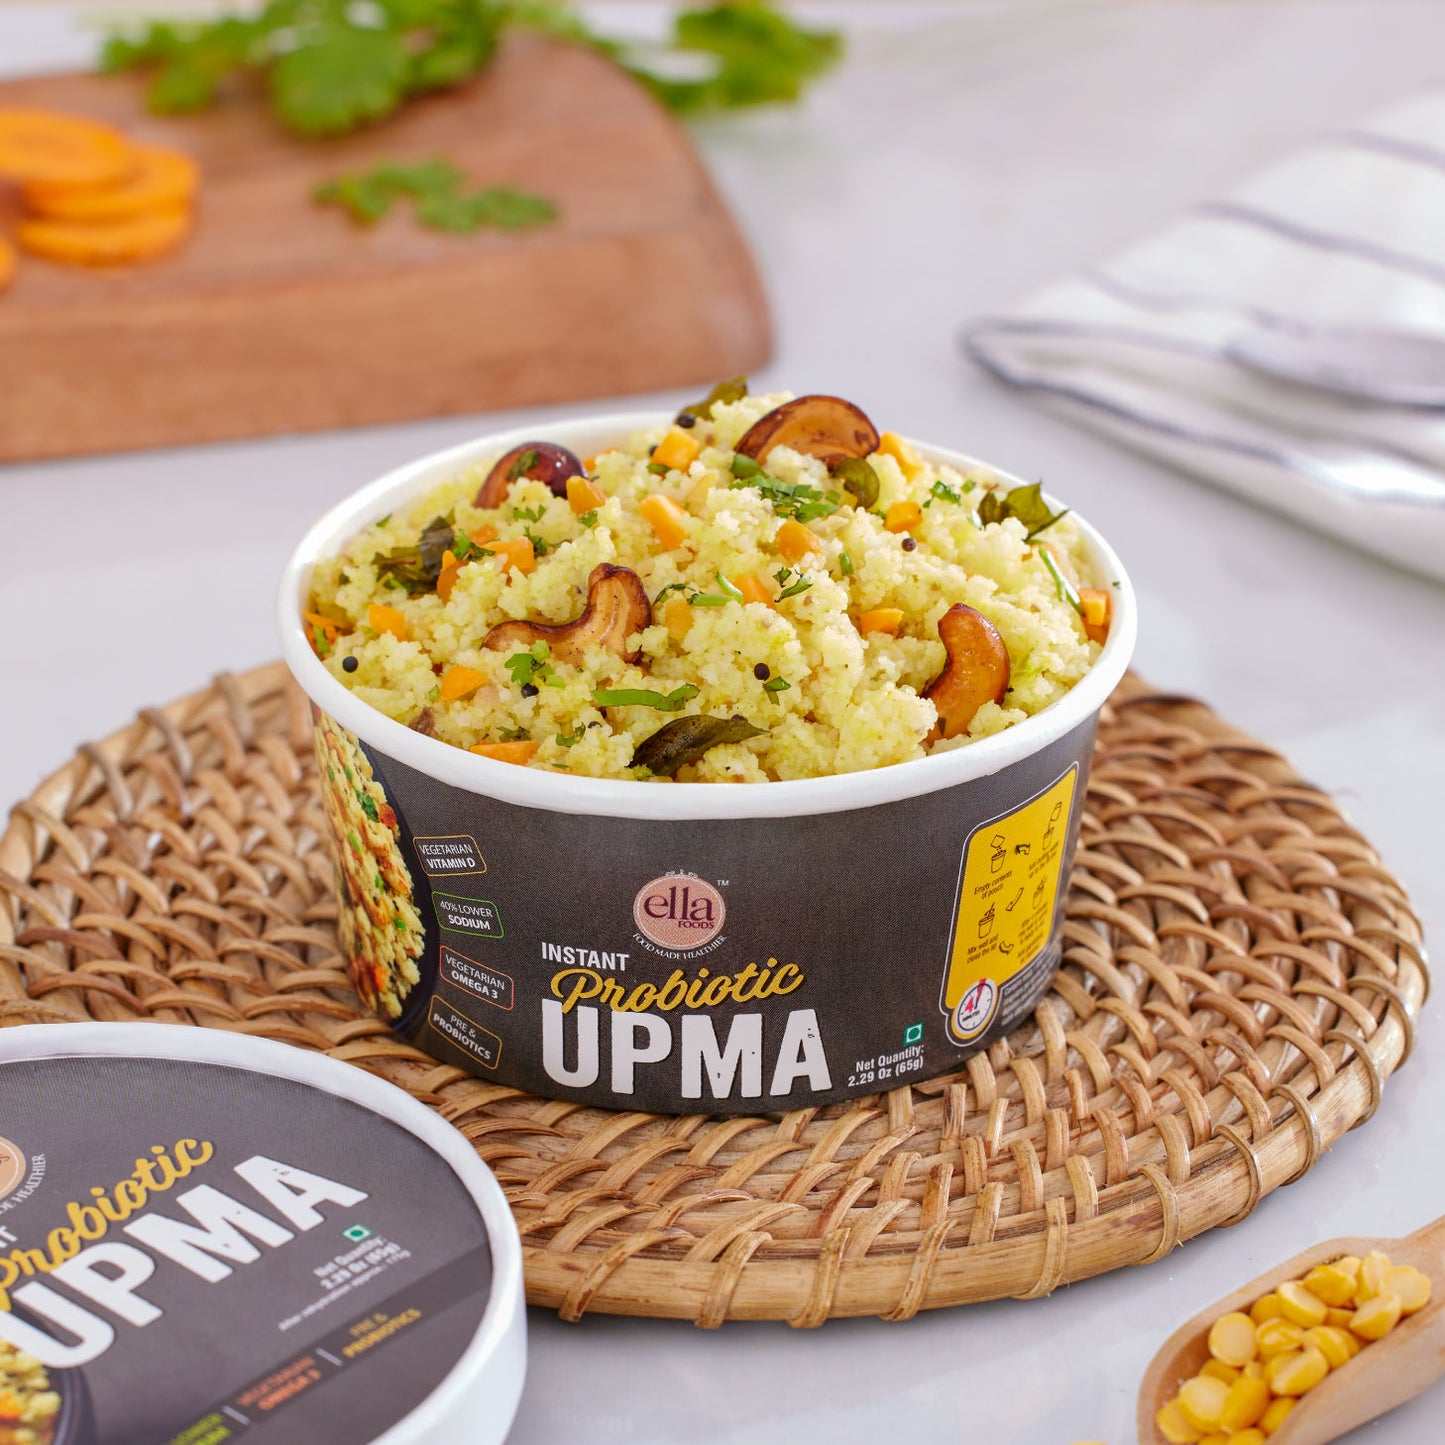 Ella Foods - Ready to Eat Instant Probiotic Upma- Pack of 2 (65g x 2)